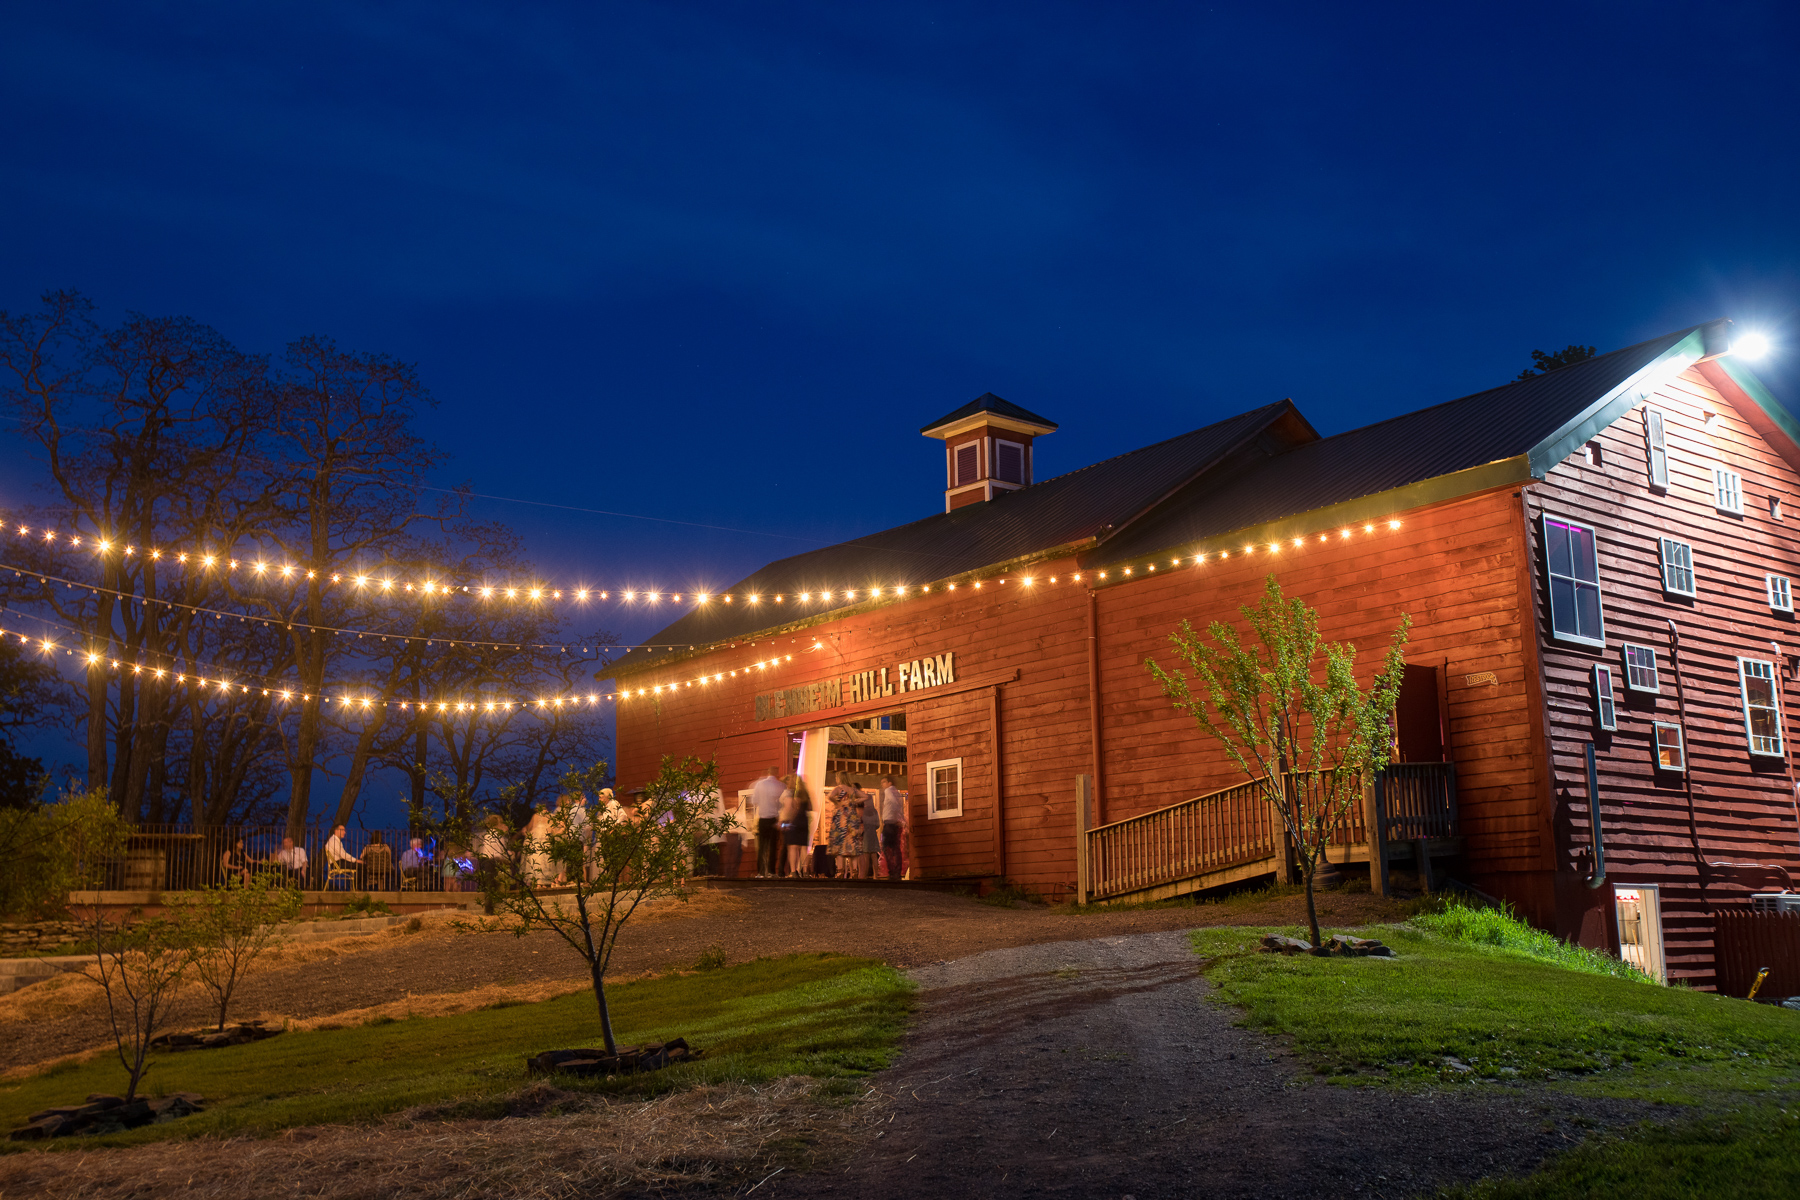 A night time view of the renovated barn at Blenheim Hill Farm